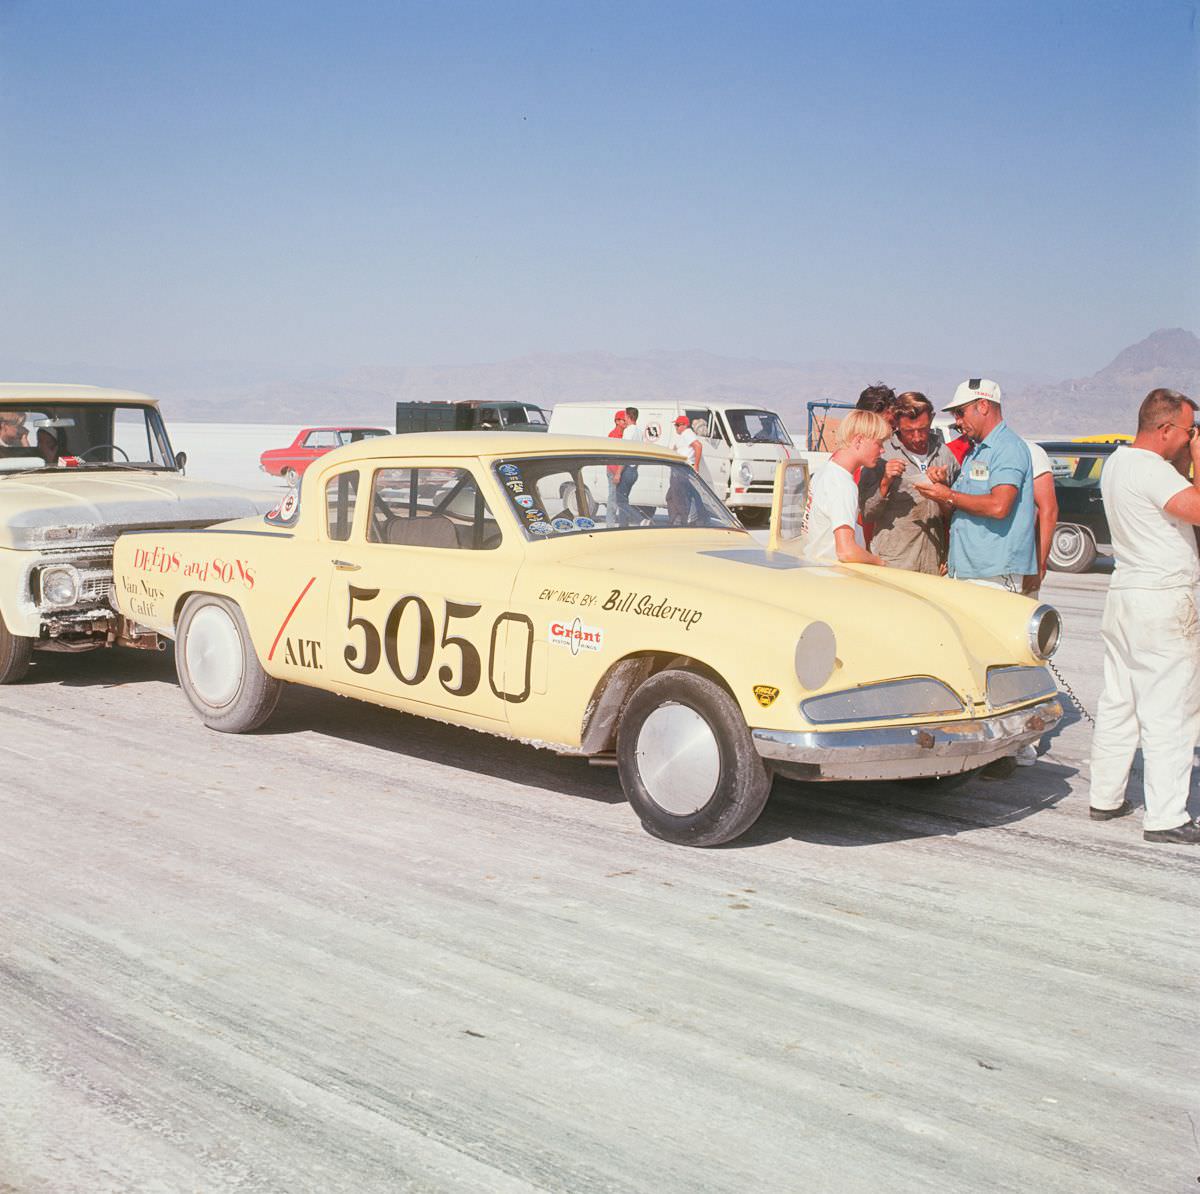 The Deeds and Saderup Studebaker, the class trophy winner in the D/Fuel Coupe and Sedan Division with 191.48 miles per hour.